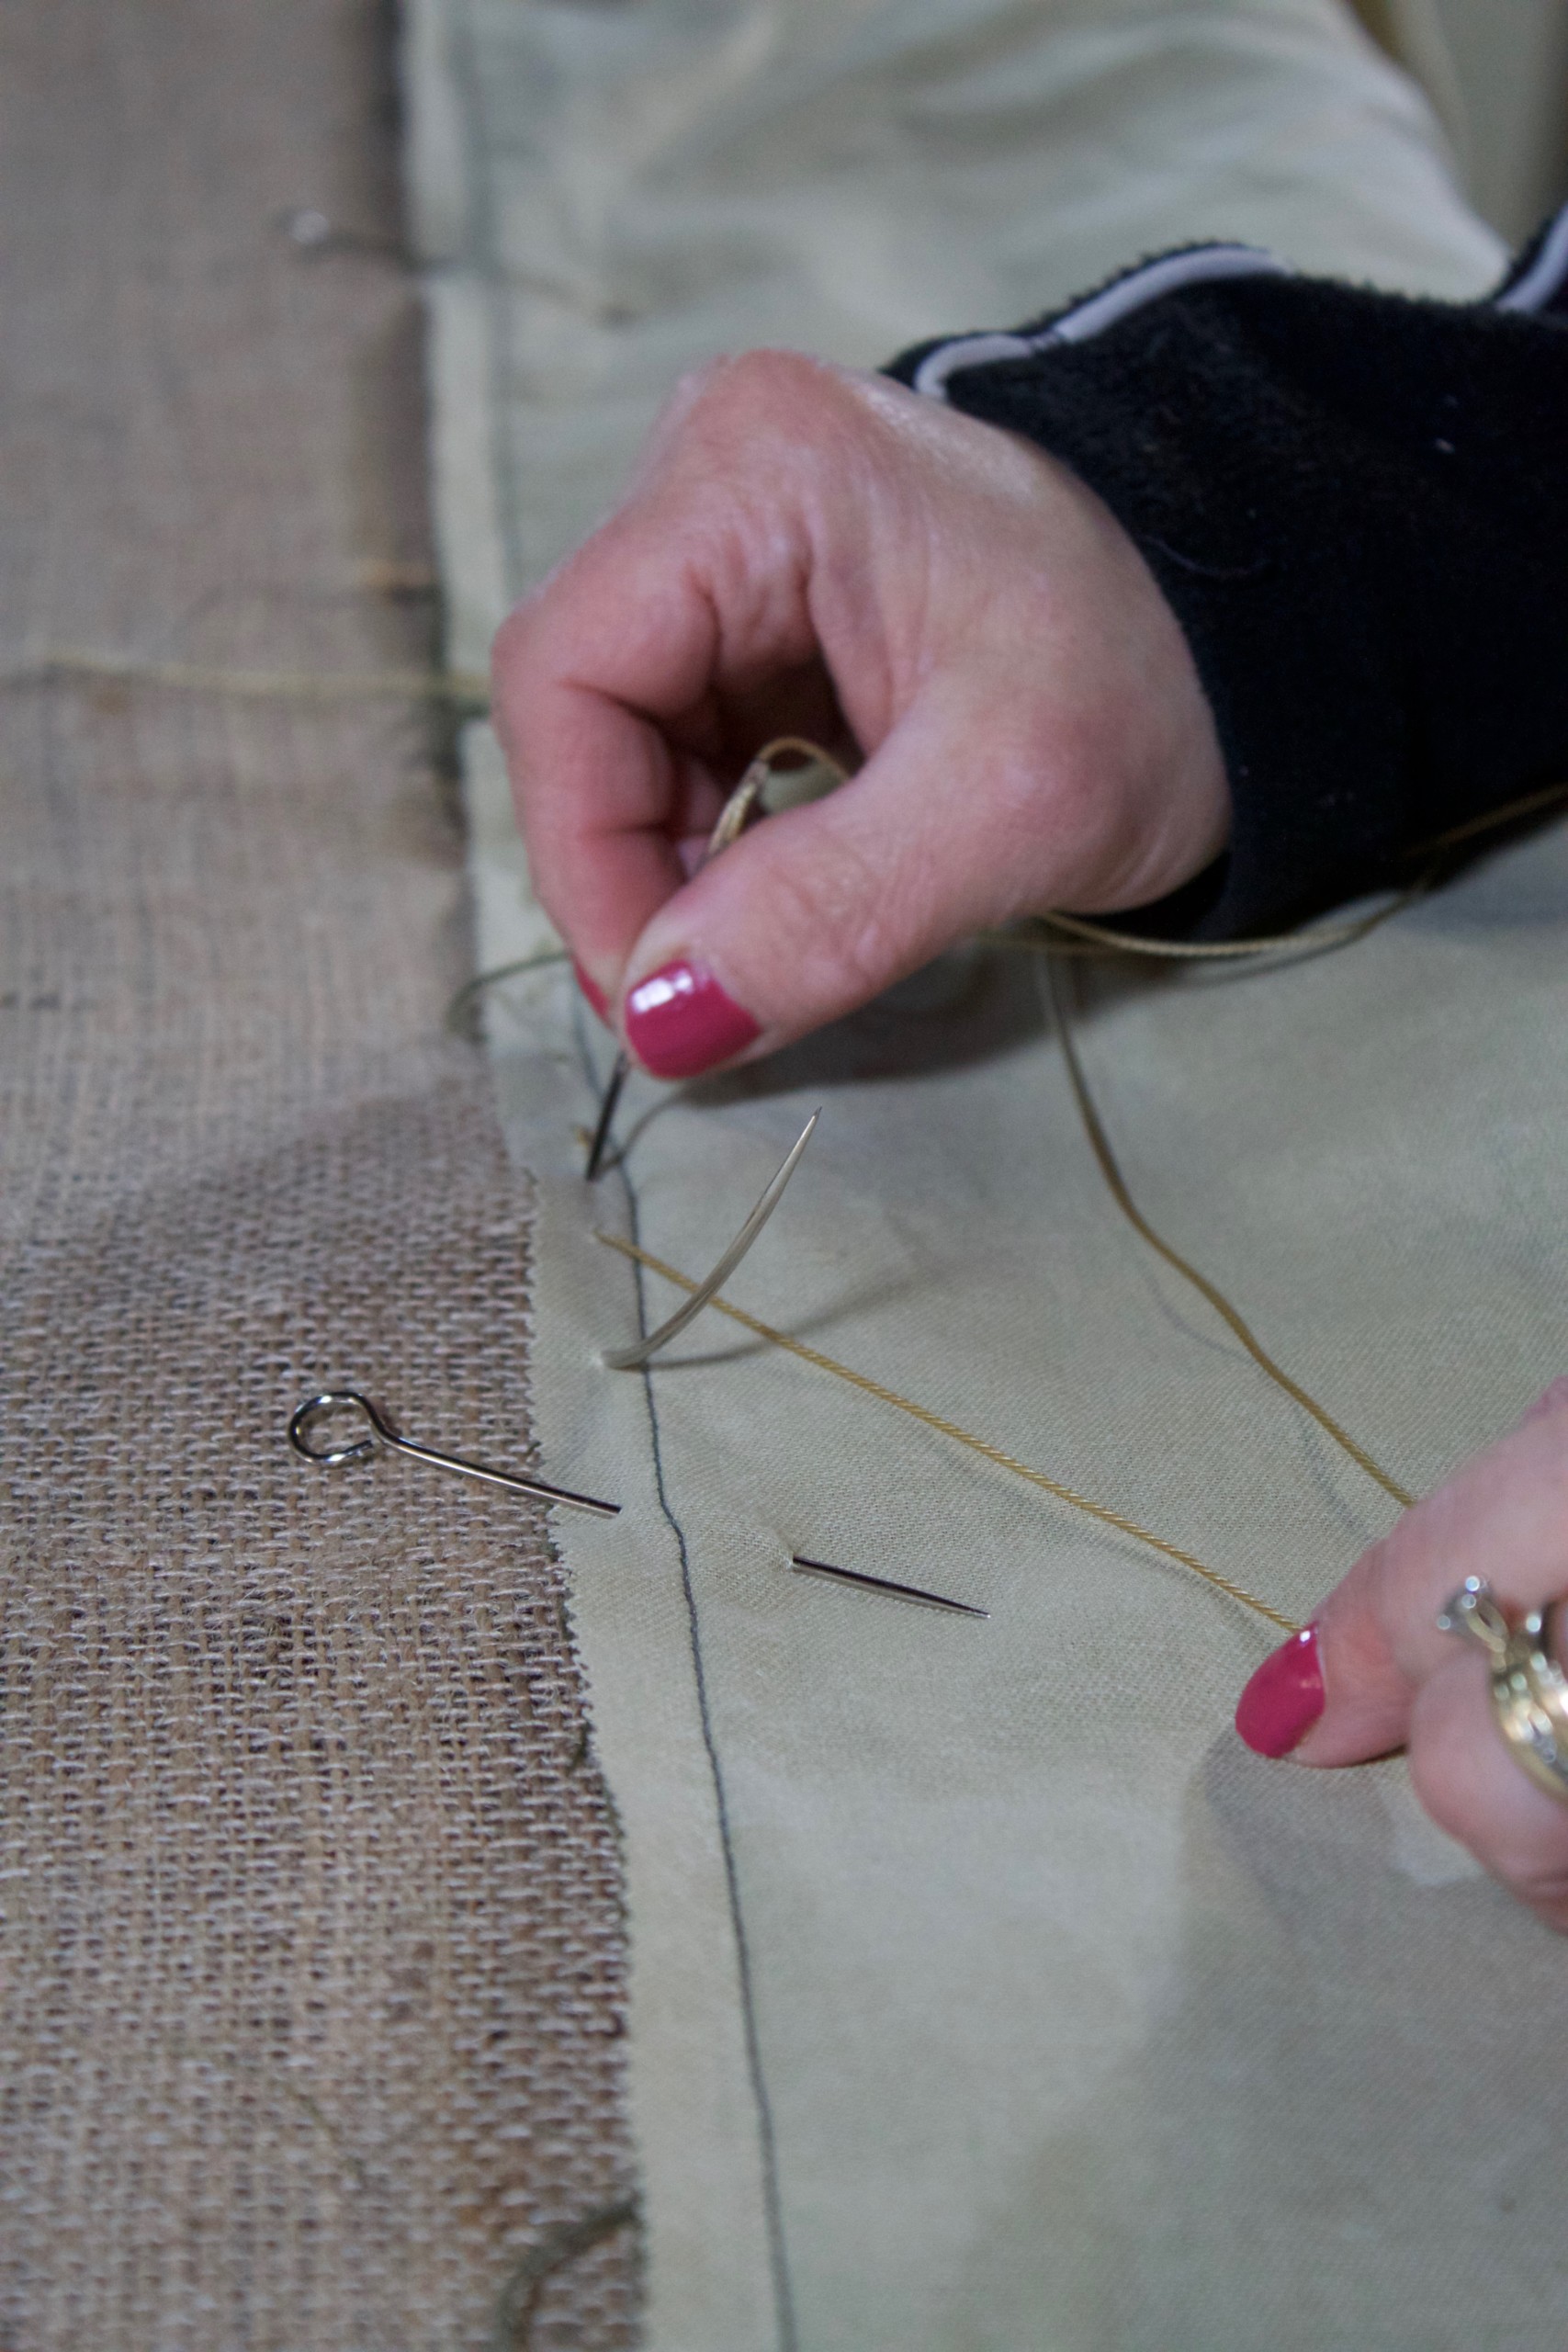 Sewing the Deck with 6" Curved needle for upholstery